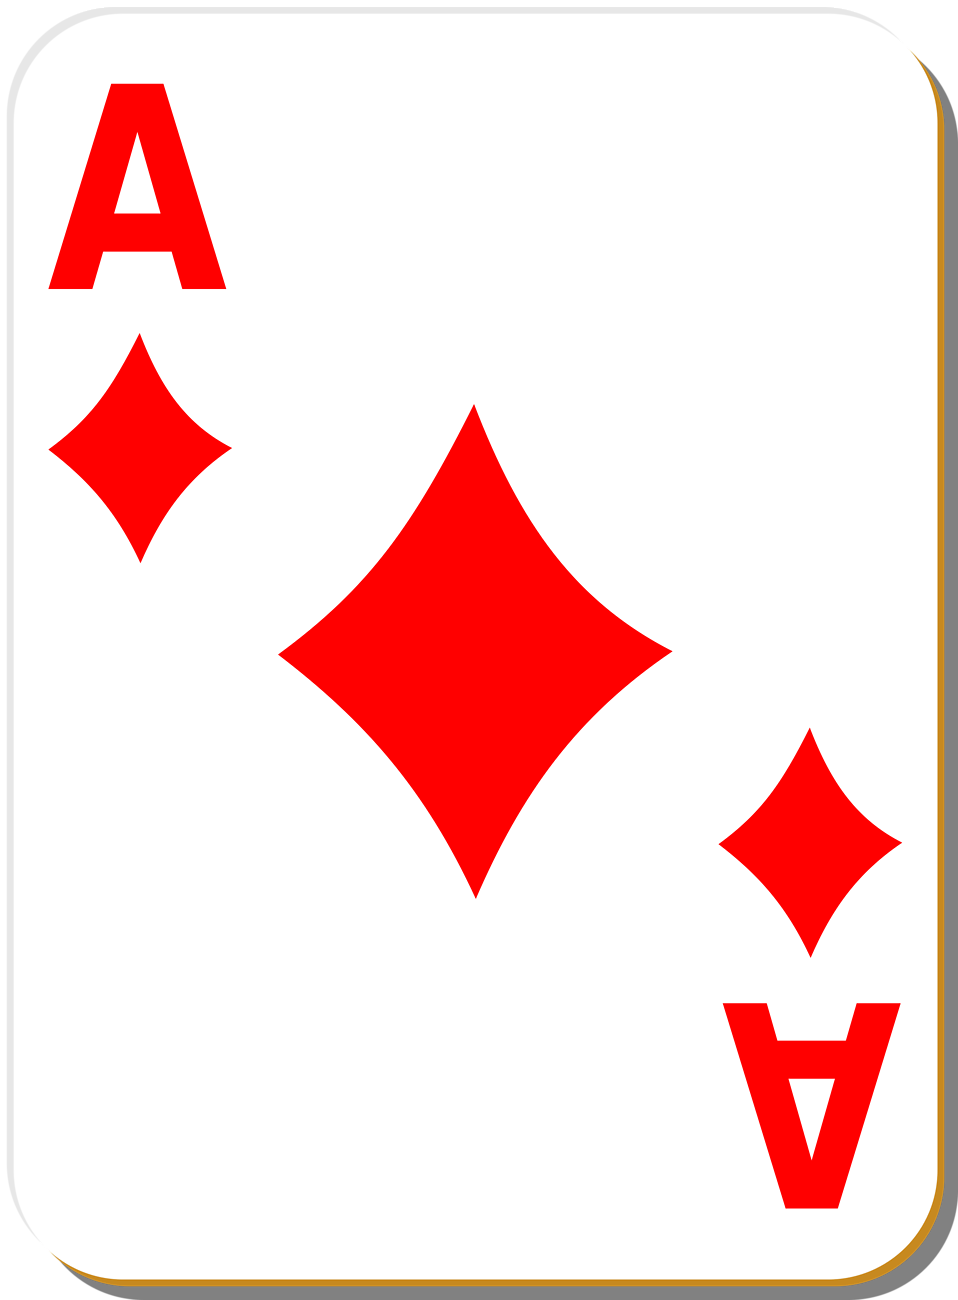 Playing Card | Free Stock Photo | Illustration of an Ace of ...